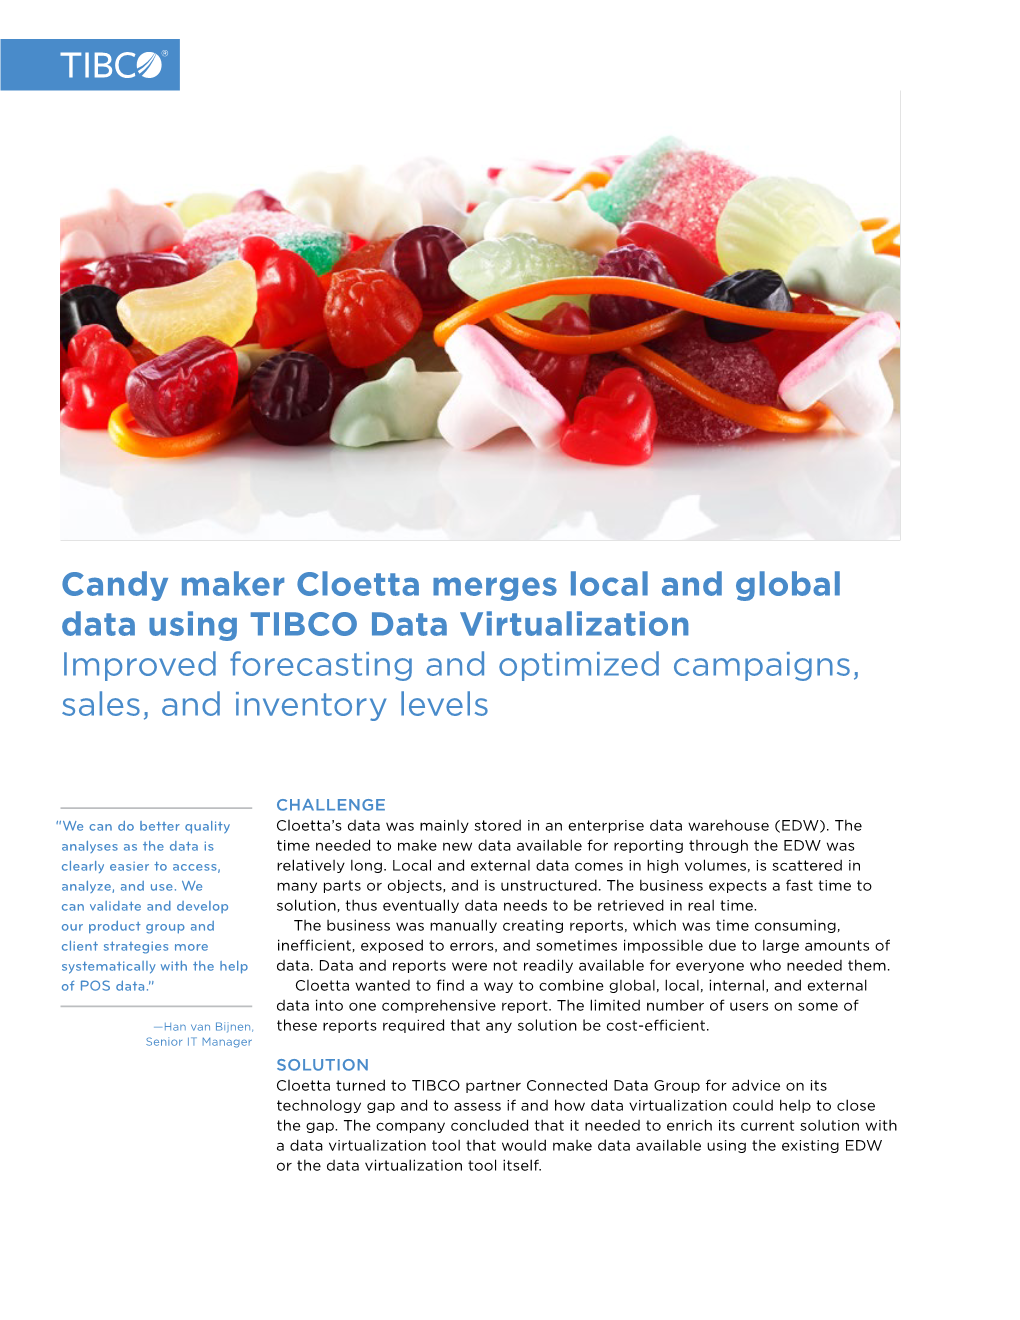 Candy Maker Cloetta Merges Local and Global Data Using TIBCO Data Virtualization Improved Forecasting and Optimized Campaigns, Sales, and Inventory Levels